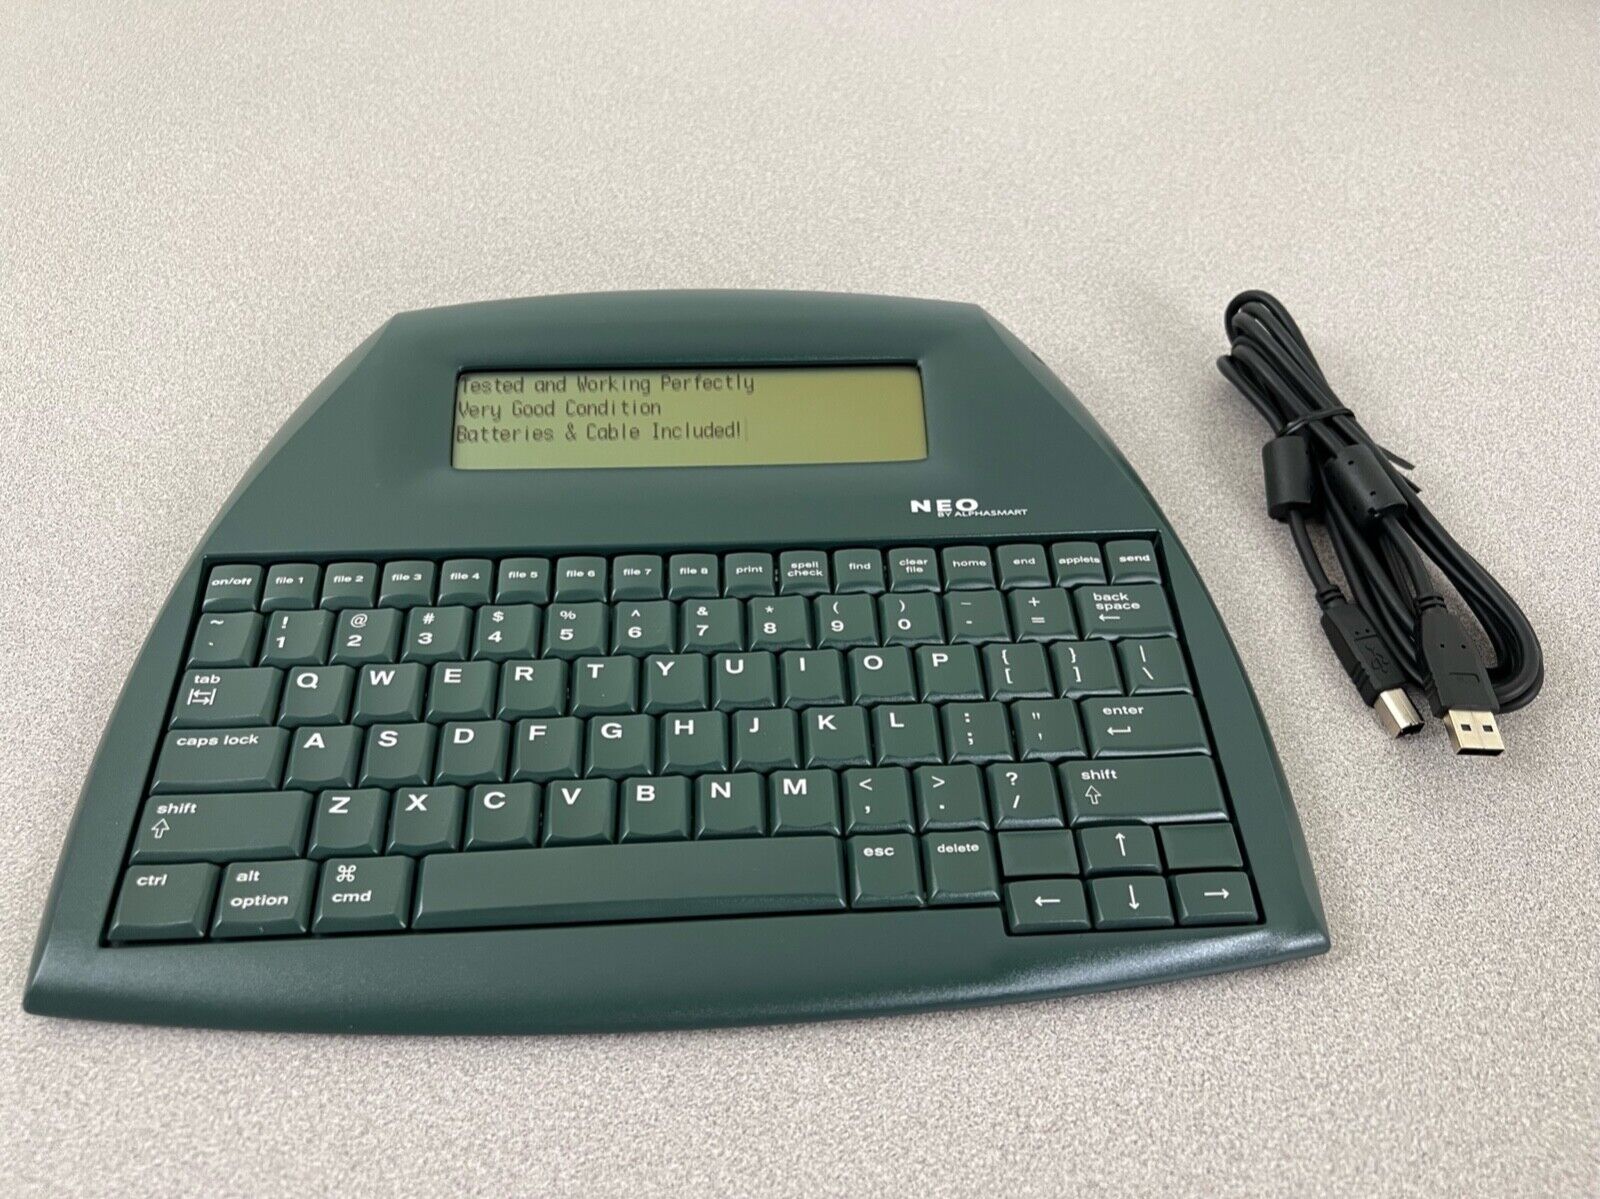 EXC AlphaSmart Neo Laptop Word Processor, Batteries, Cable, Tested SHIPS FAST